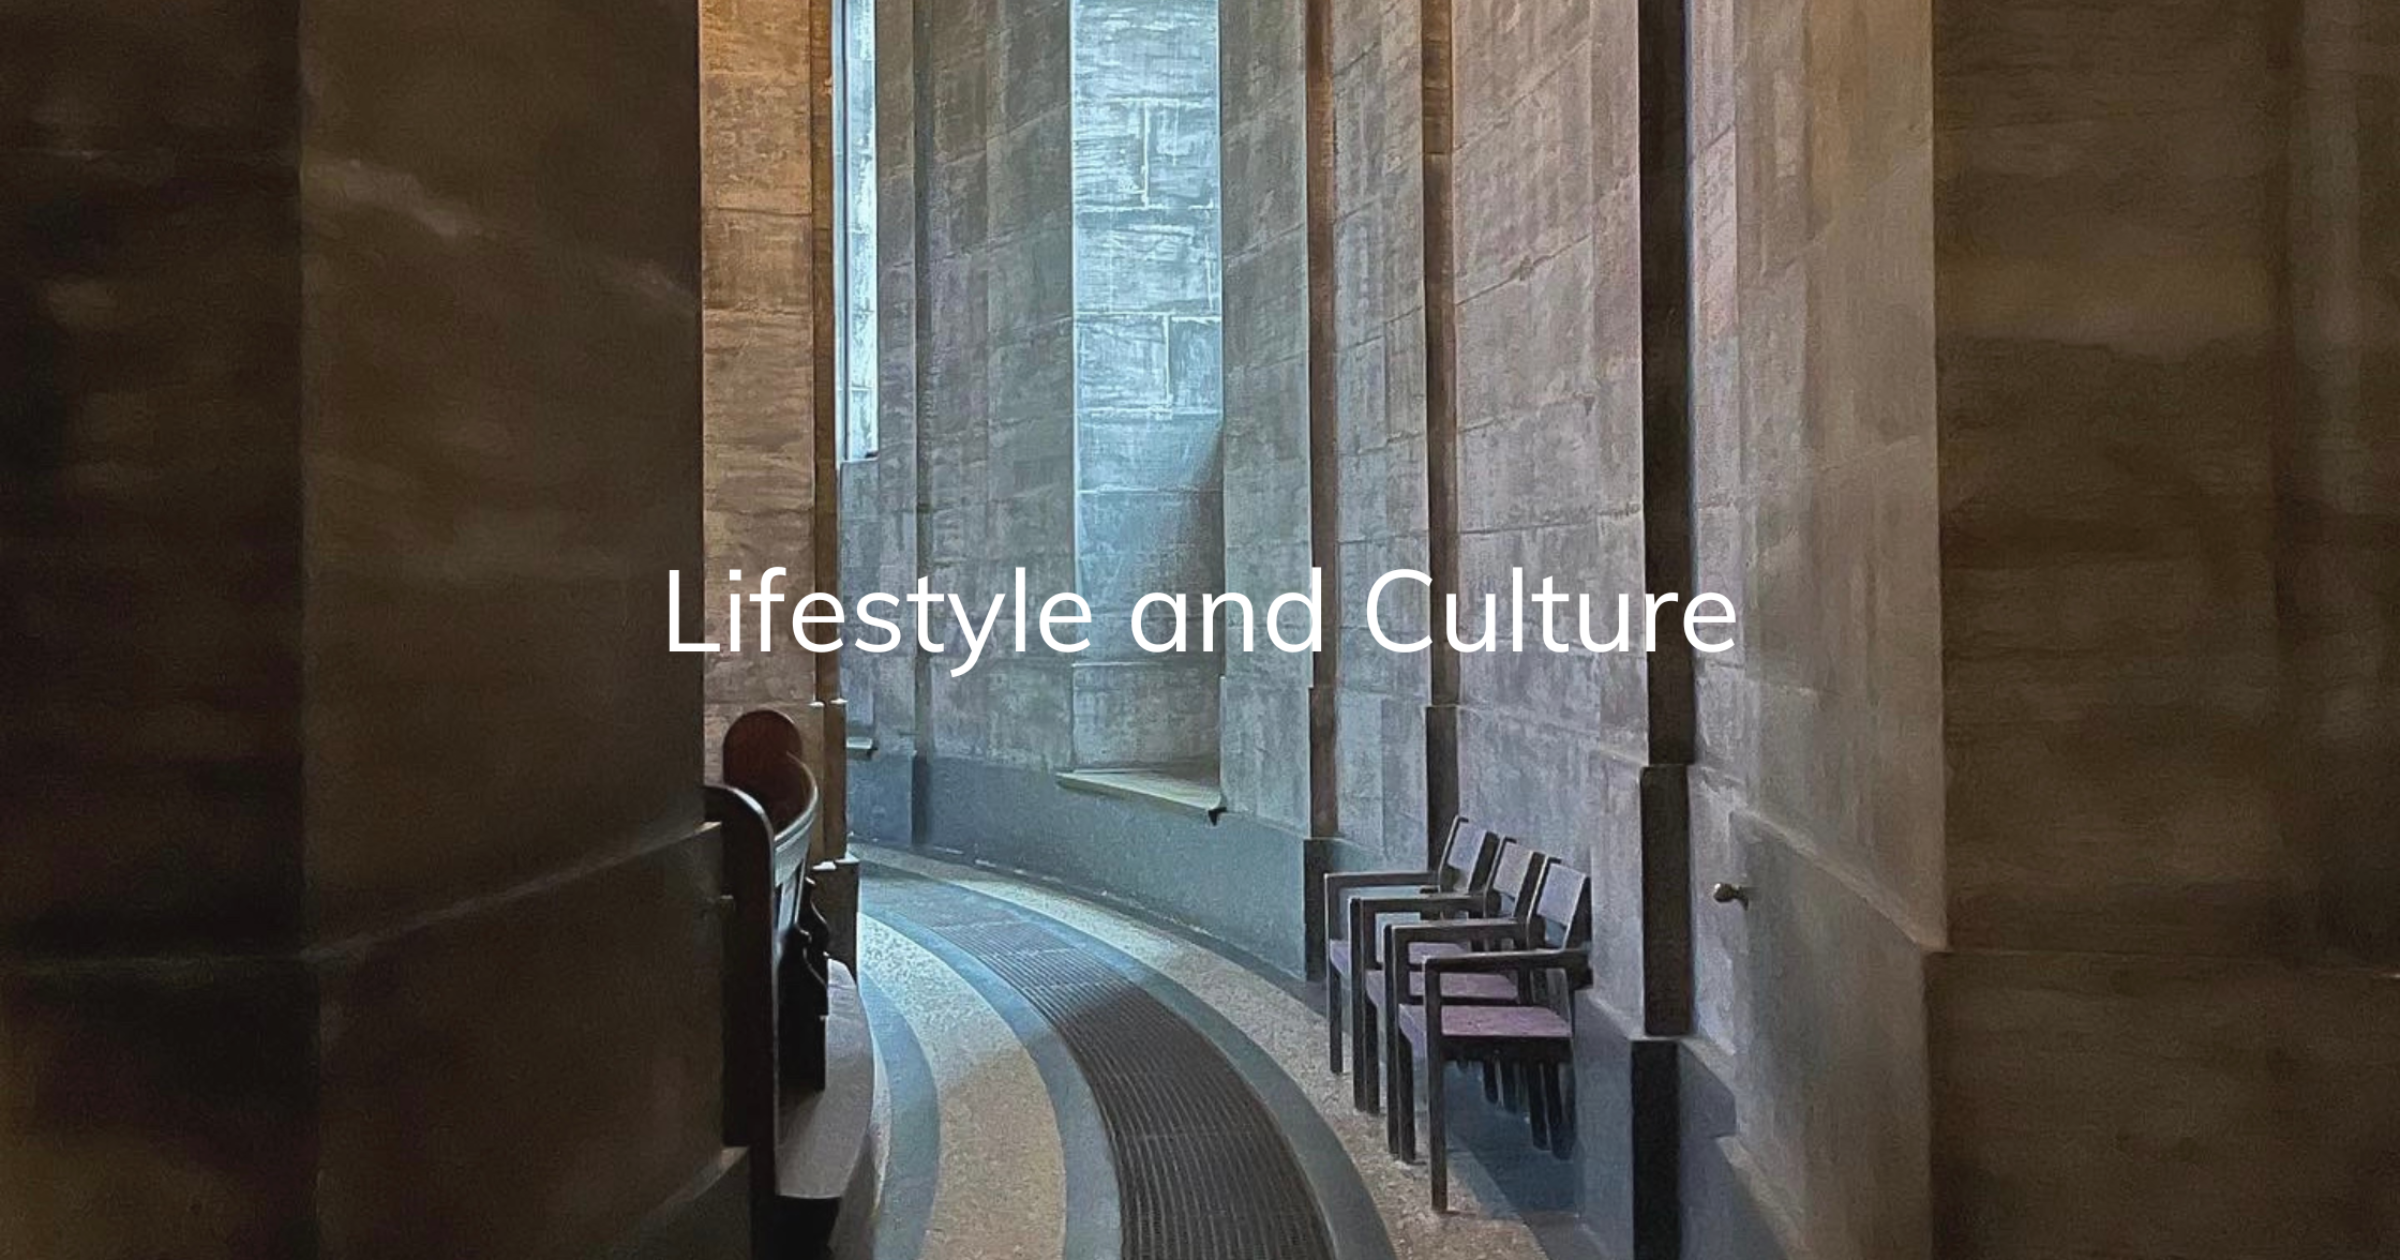 Lifestyle and Culture